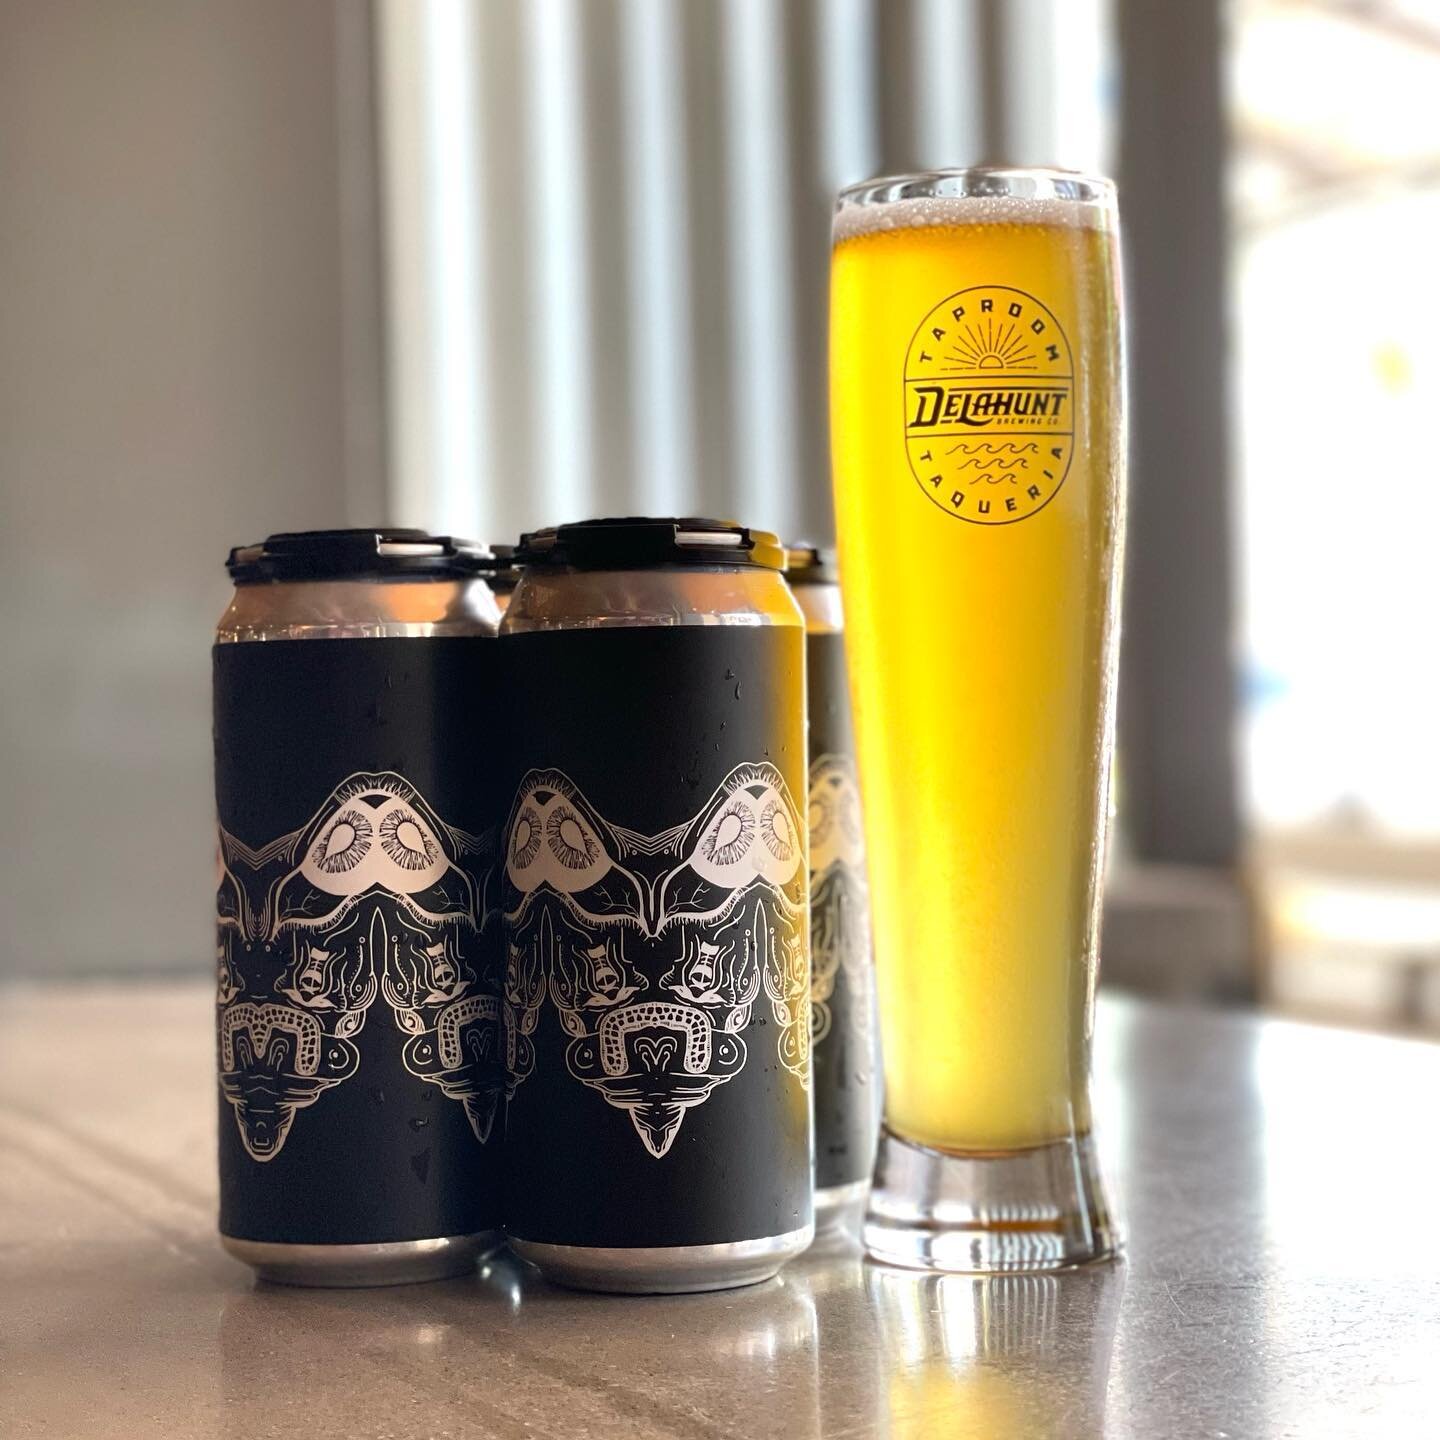 Can release this Friday at the Grand Opening of the taproom in Dana Point @delahuntbrewing_dp 
Doors open at 11:00 SM Familia playing 2-5. Come down enjoy some great beer, amazing tacos and good tunes. 
See you Friday. 

Tuesday Gone
Oat Lager 4.6%
A